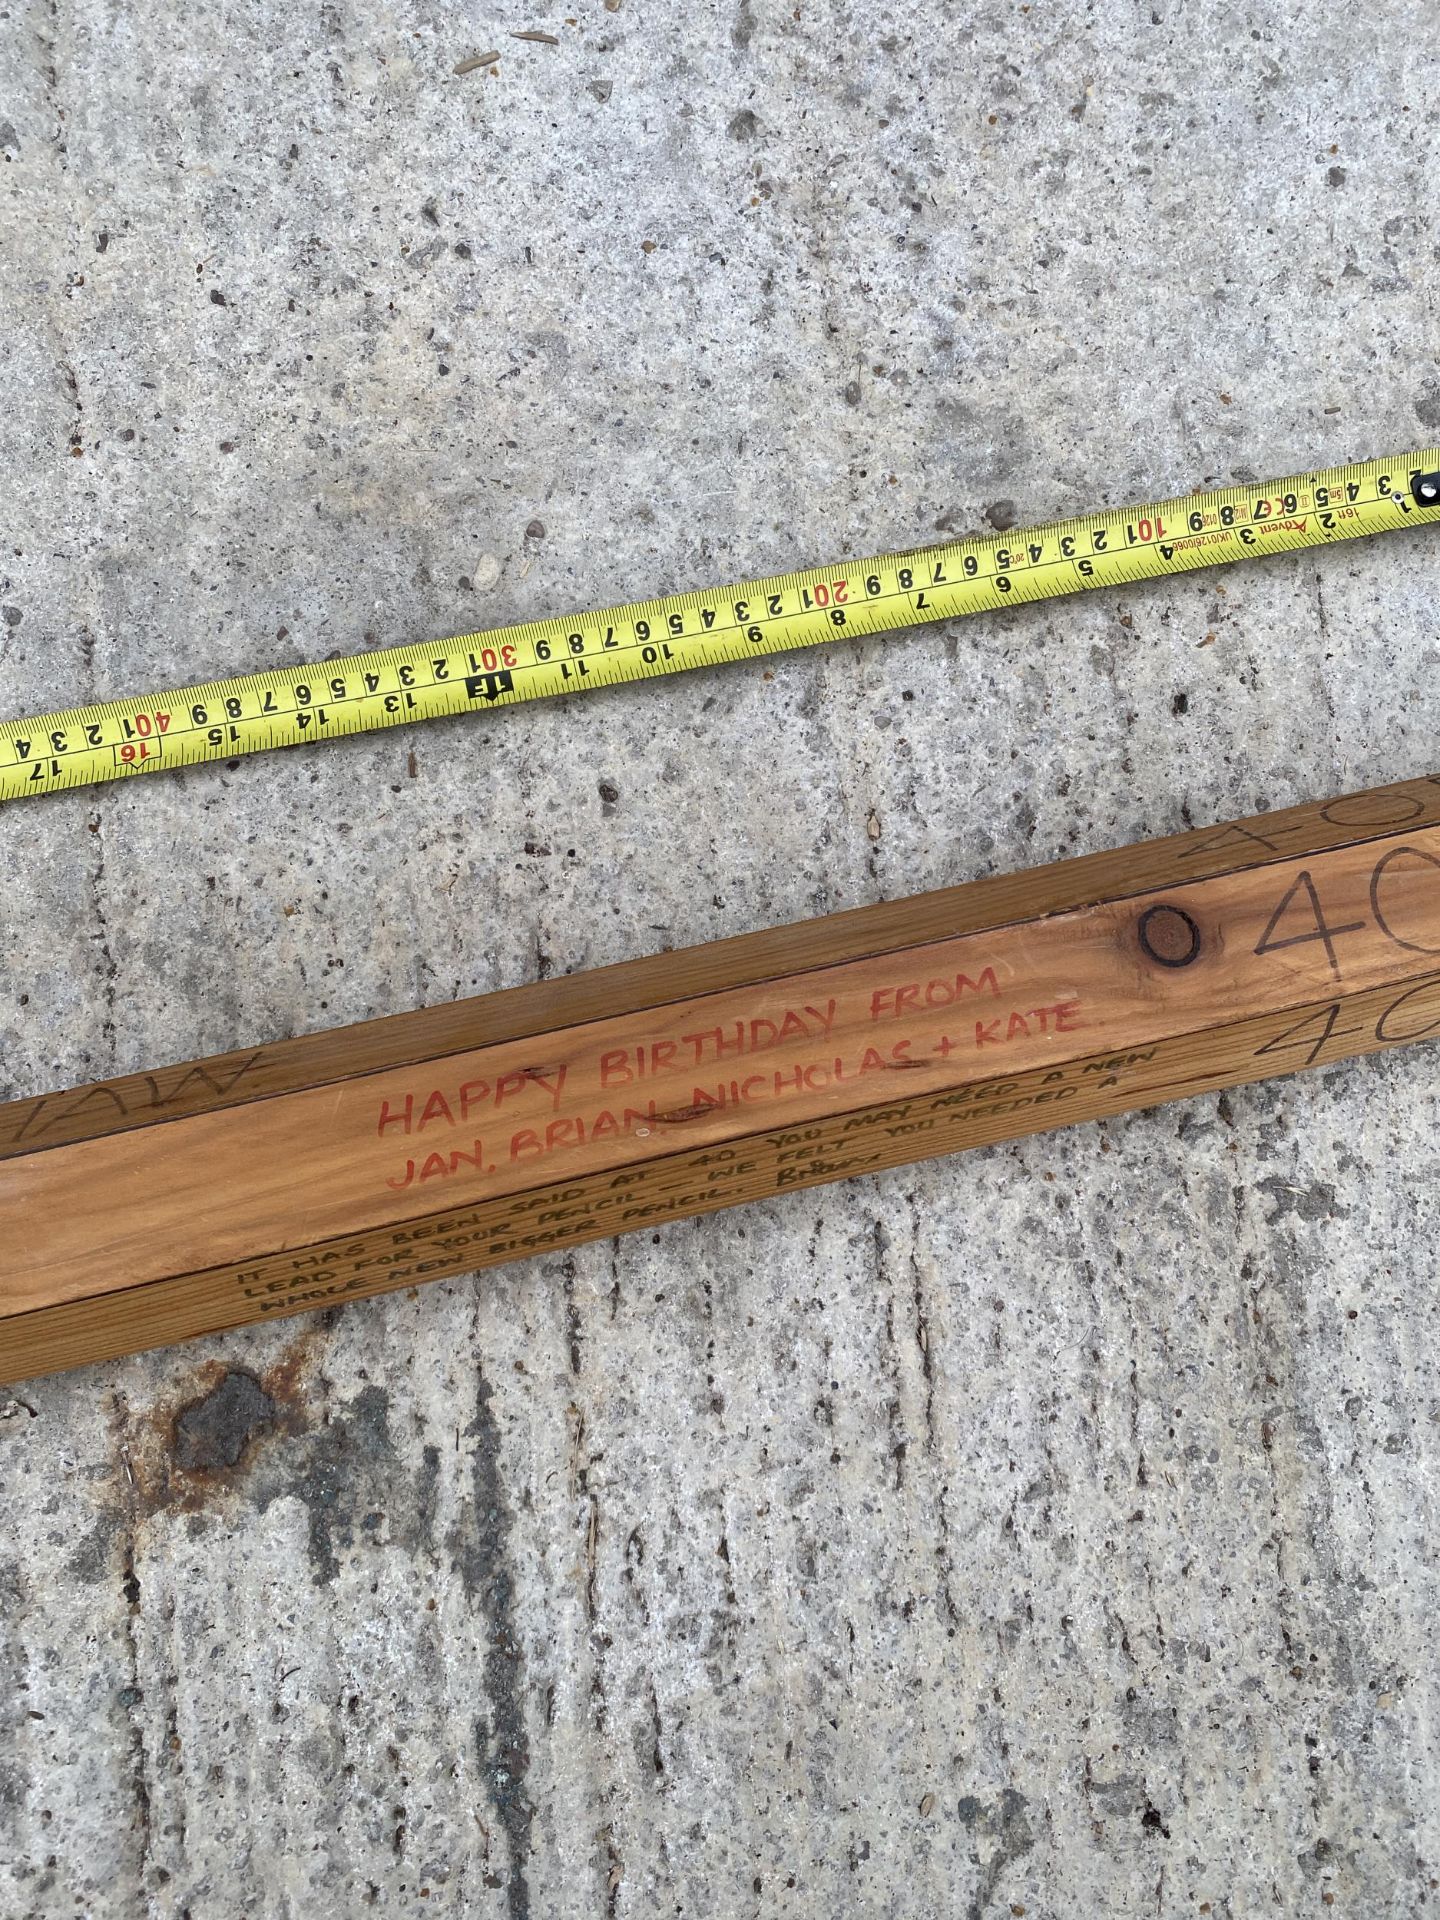 A LARGE DECORATIVE WOODEN DISPLAY PENCIL - Image 5 of 6